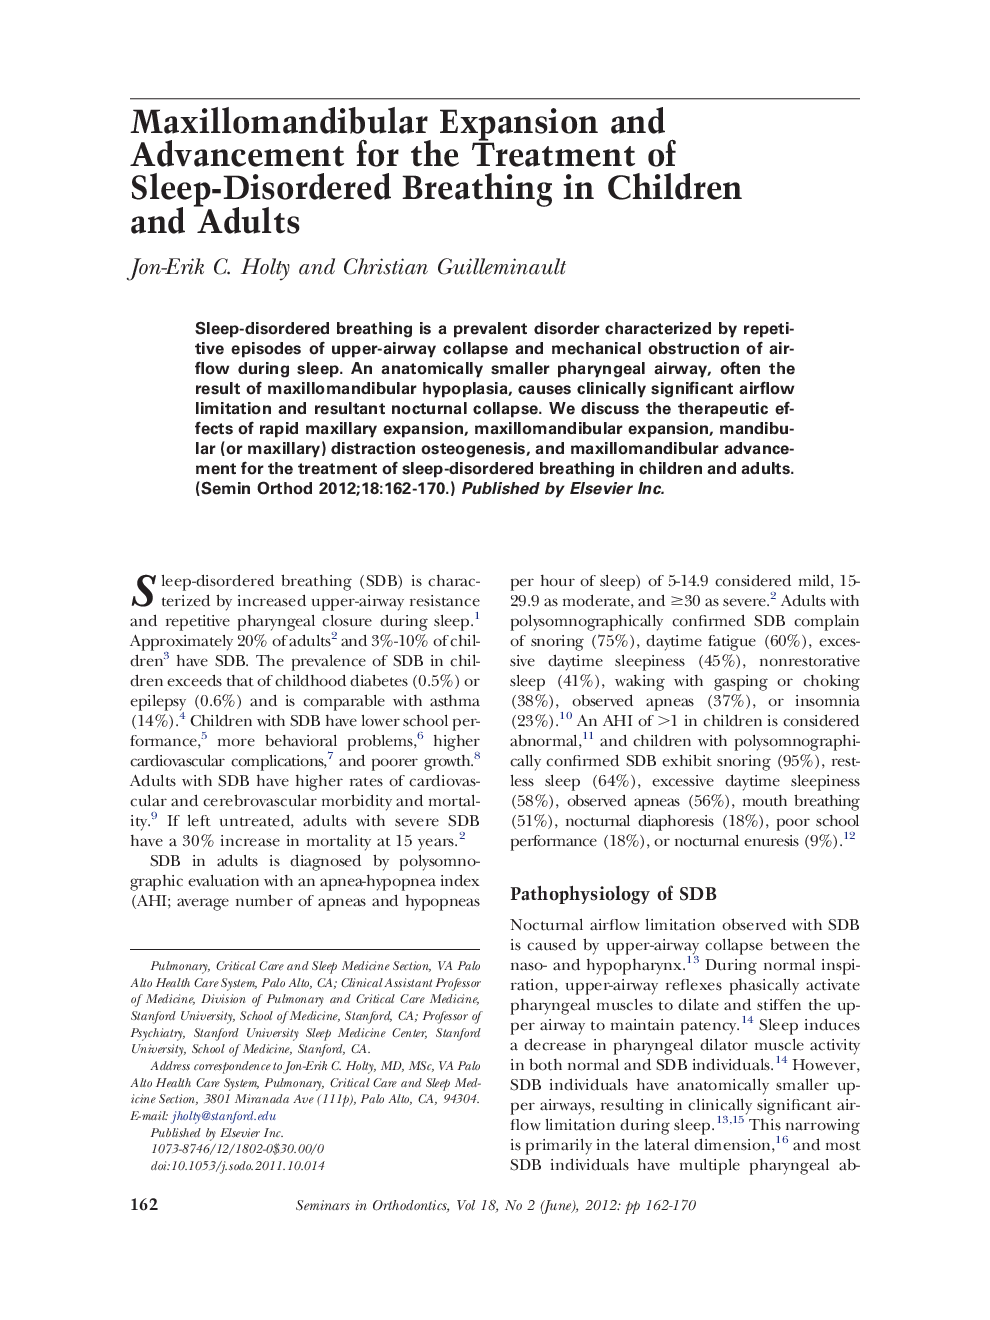 Maxillomandibular Expansion and Advancement for the Treatment of Sleep-Disordered Breathing in Children and Adults